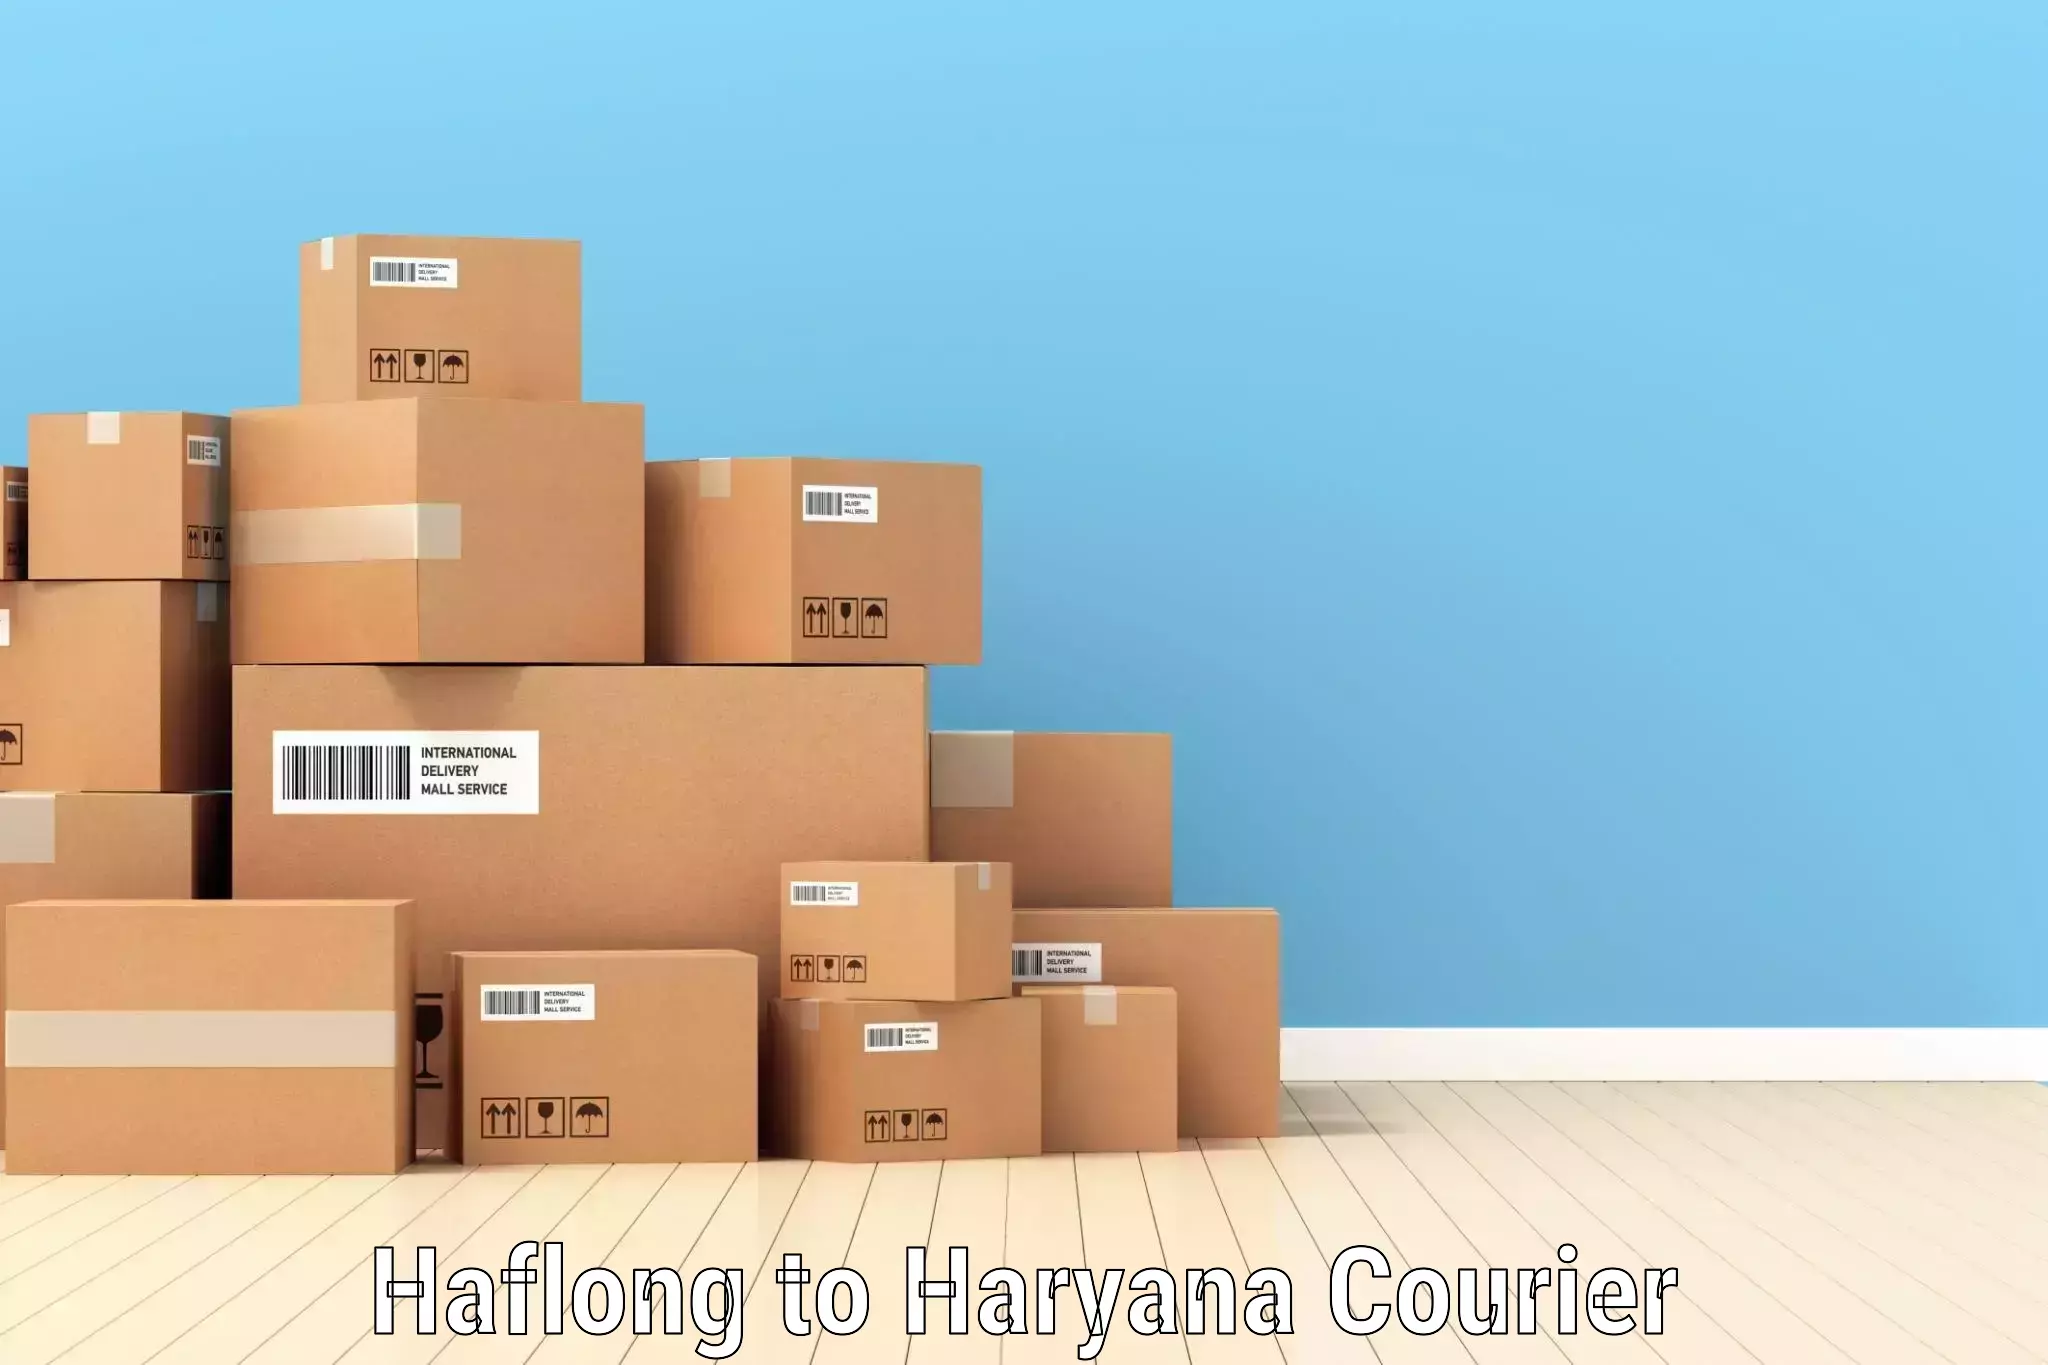 High-speed delivery Haflong to Bilaspur Haryana